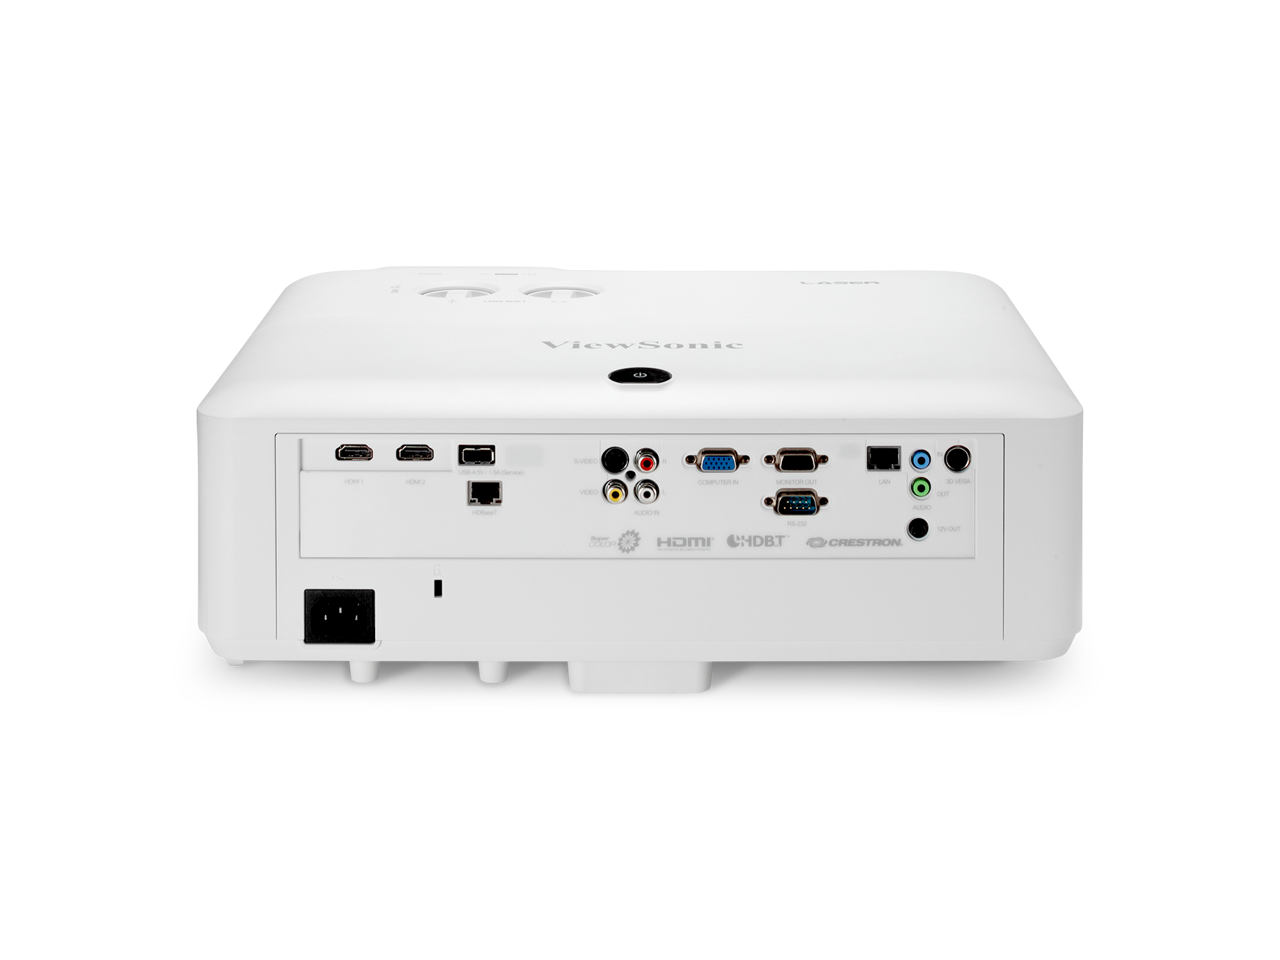 ViewSonic LS850WU 5000 Lumens WUXGA Networkable Laser Projector with One-Wire HDBT 1.6x Optical Zoom Vertical Horizontal Keystone and Lens Shift